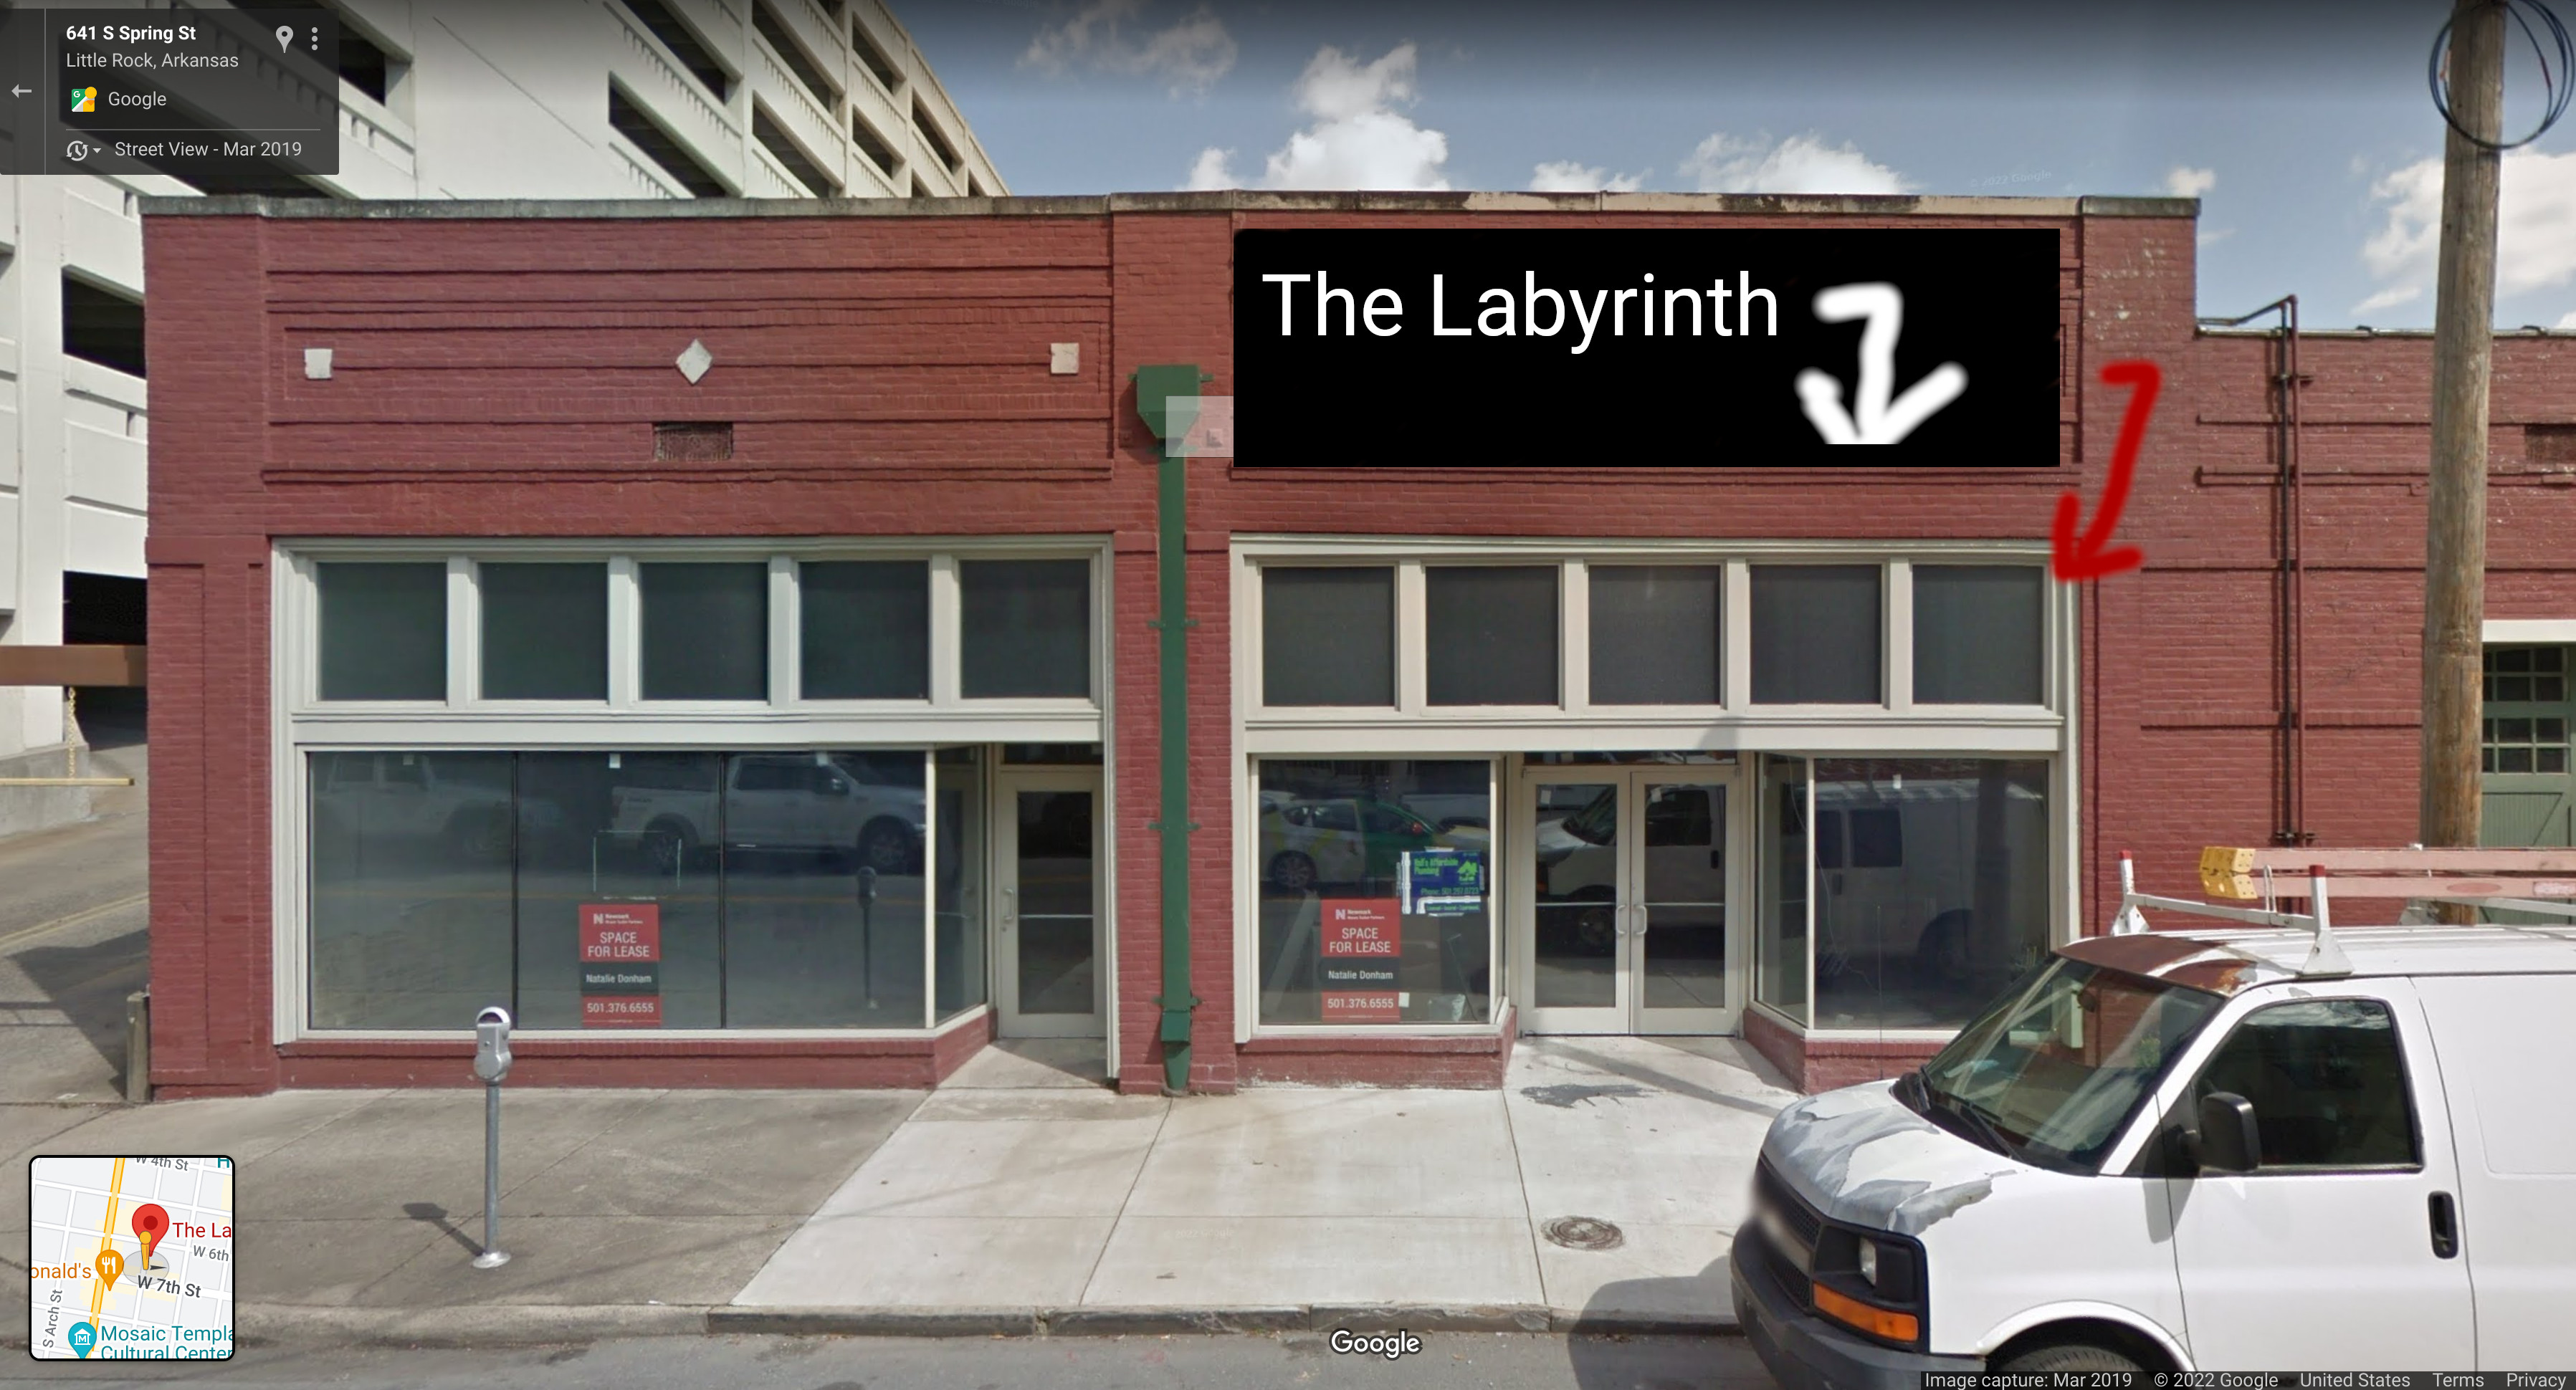 This is a modified Google Street View image showing the location of The Labyrinth.